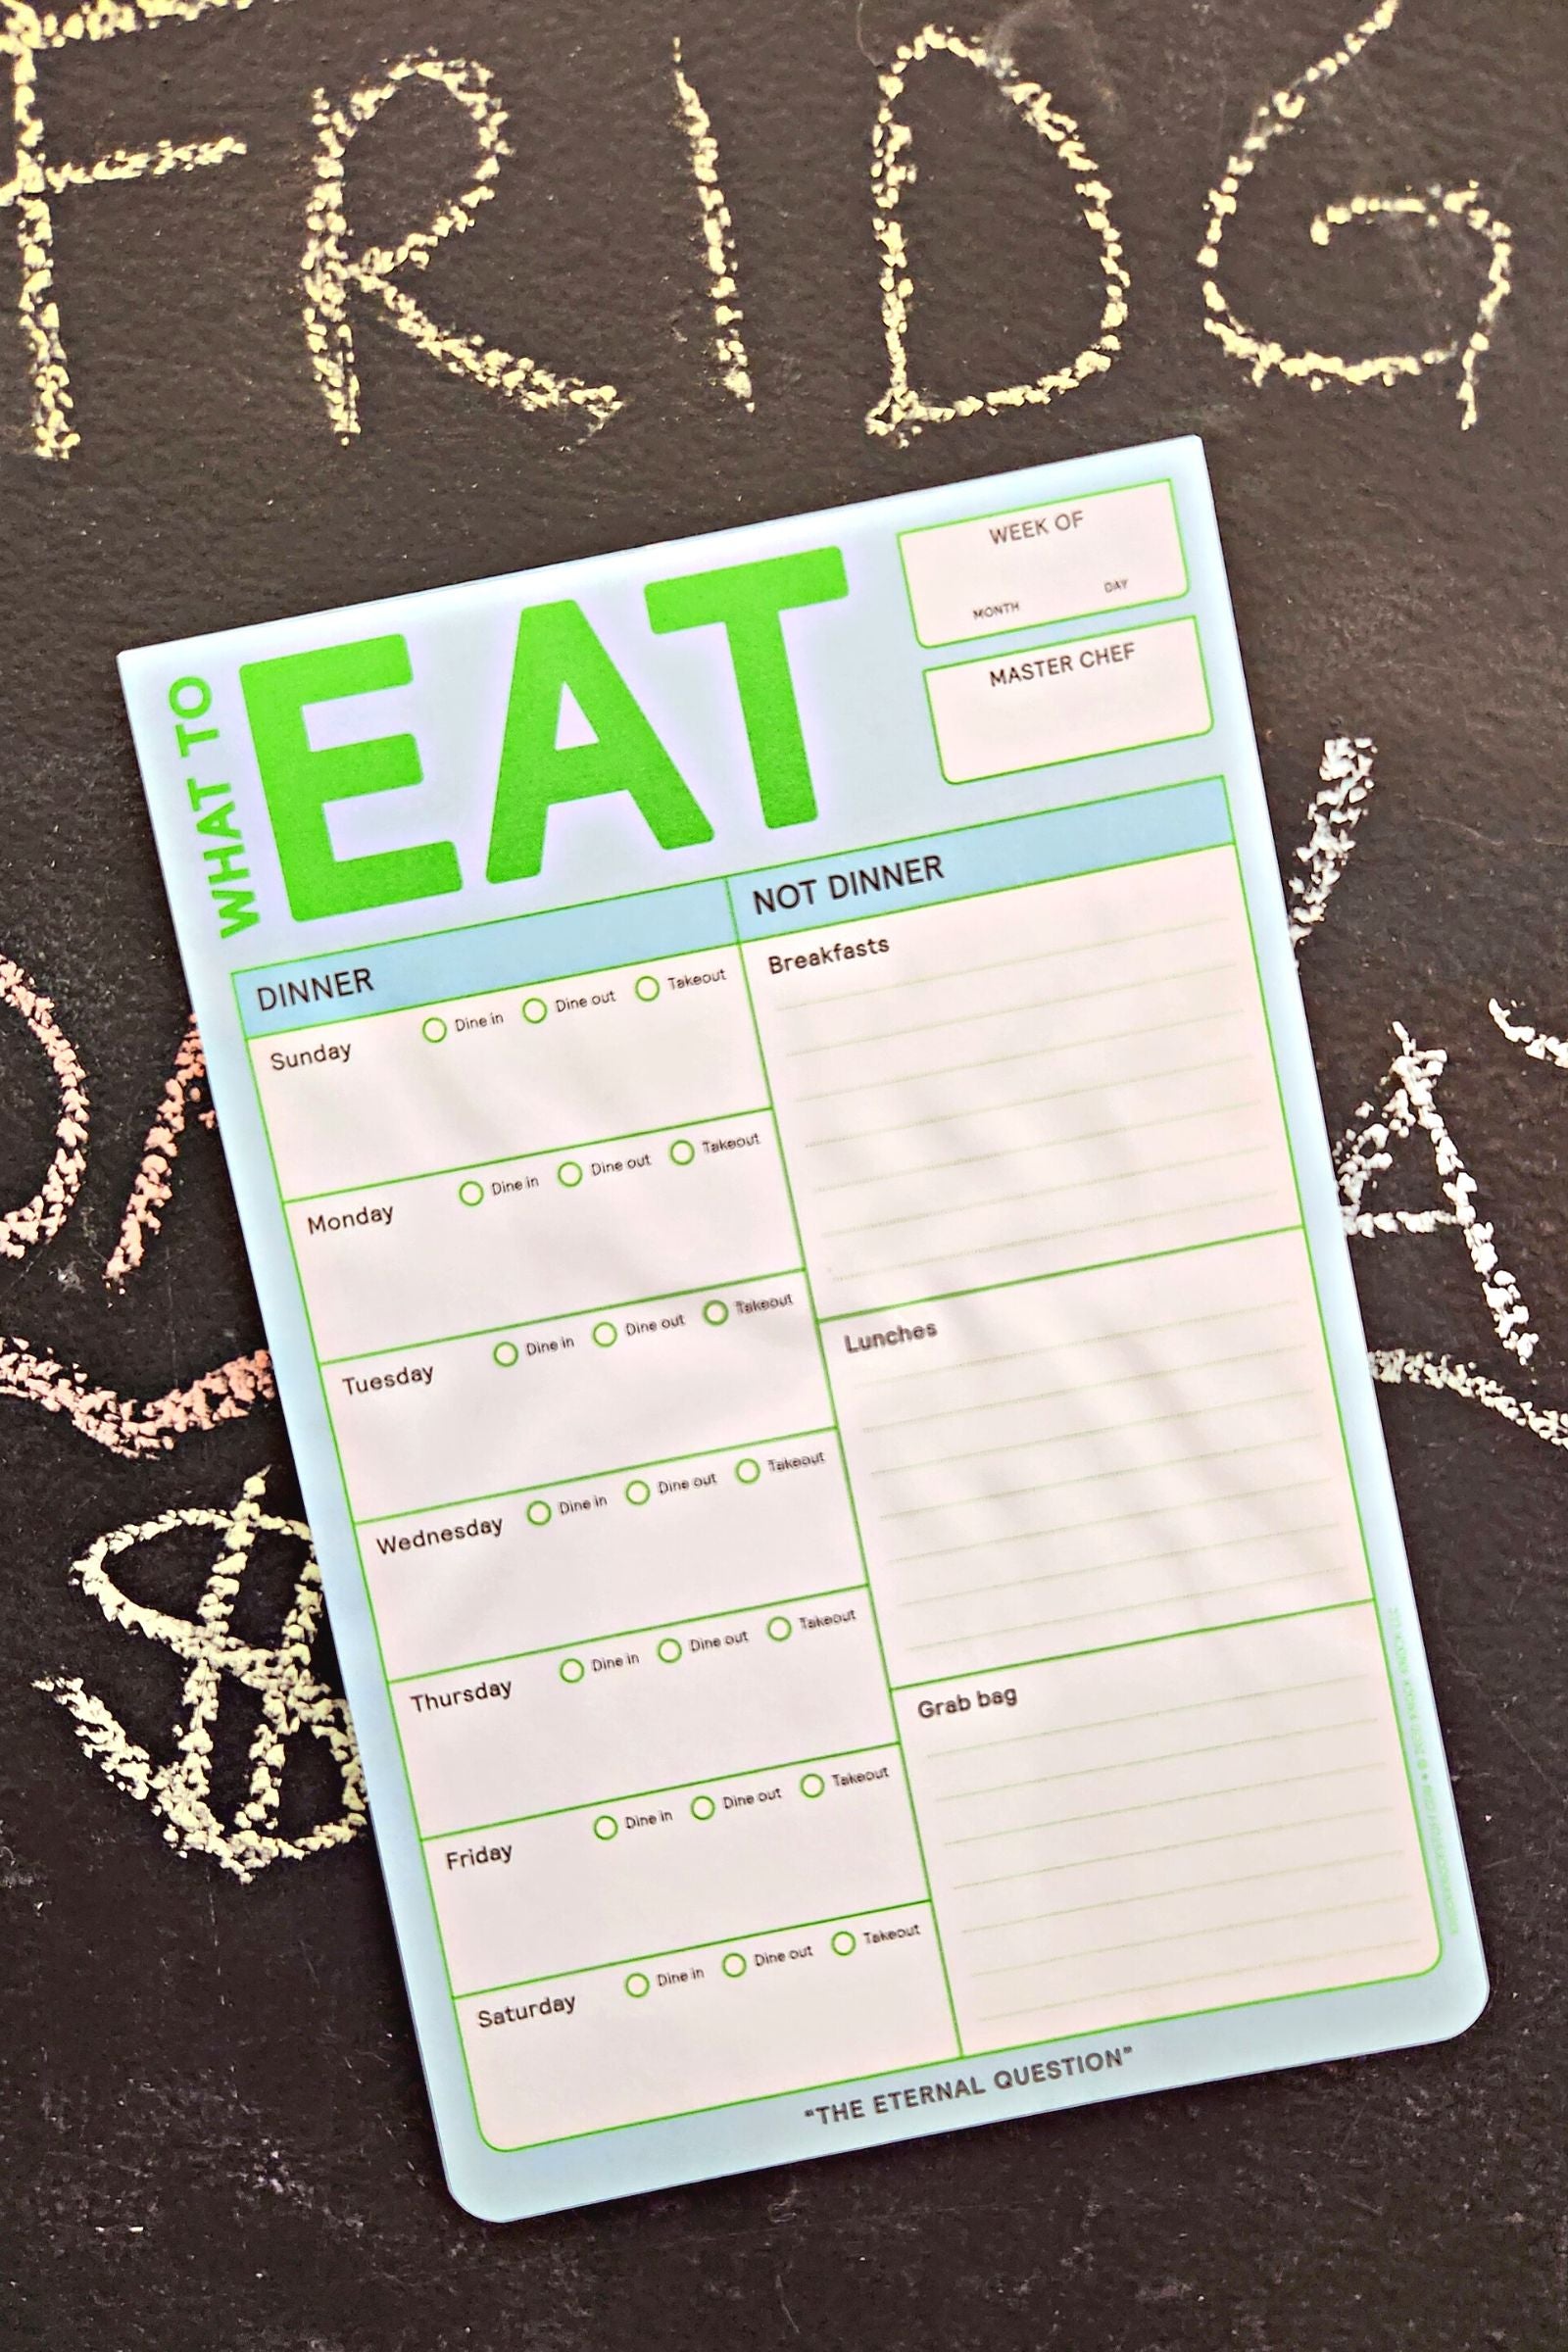 What to Eat Classic Note Pad